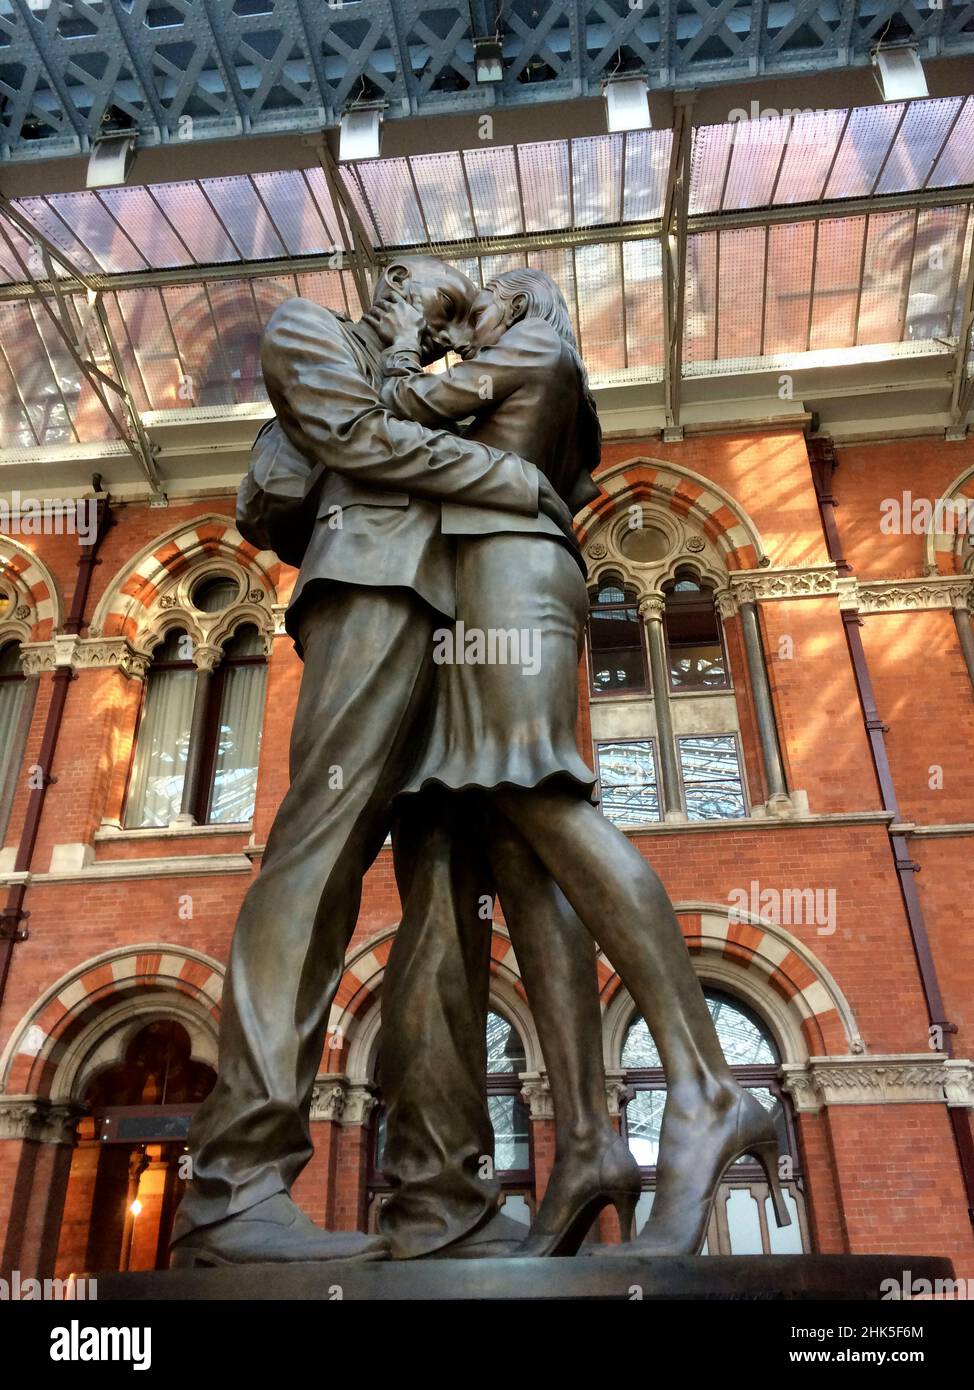 St Pancras, London, is one of the busiest railway stations in the UK. It is graced by stunning Victorian-age iron and glass architecture- as well as t Stock Photo